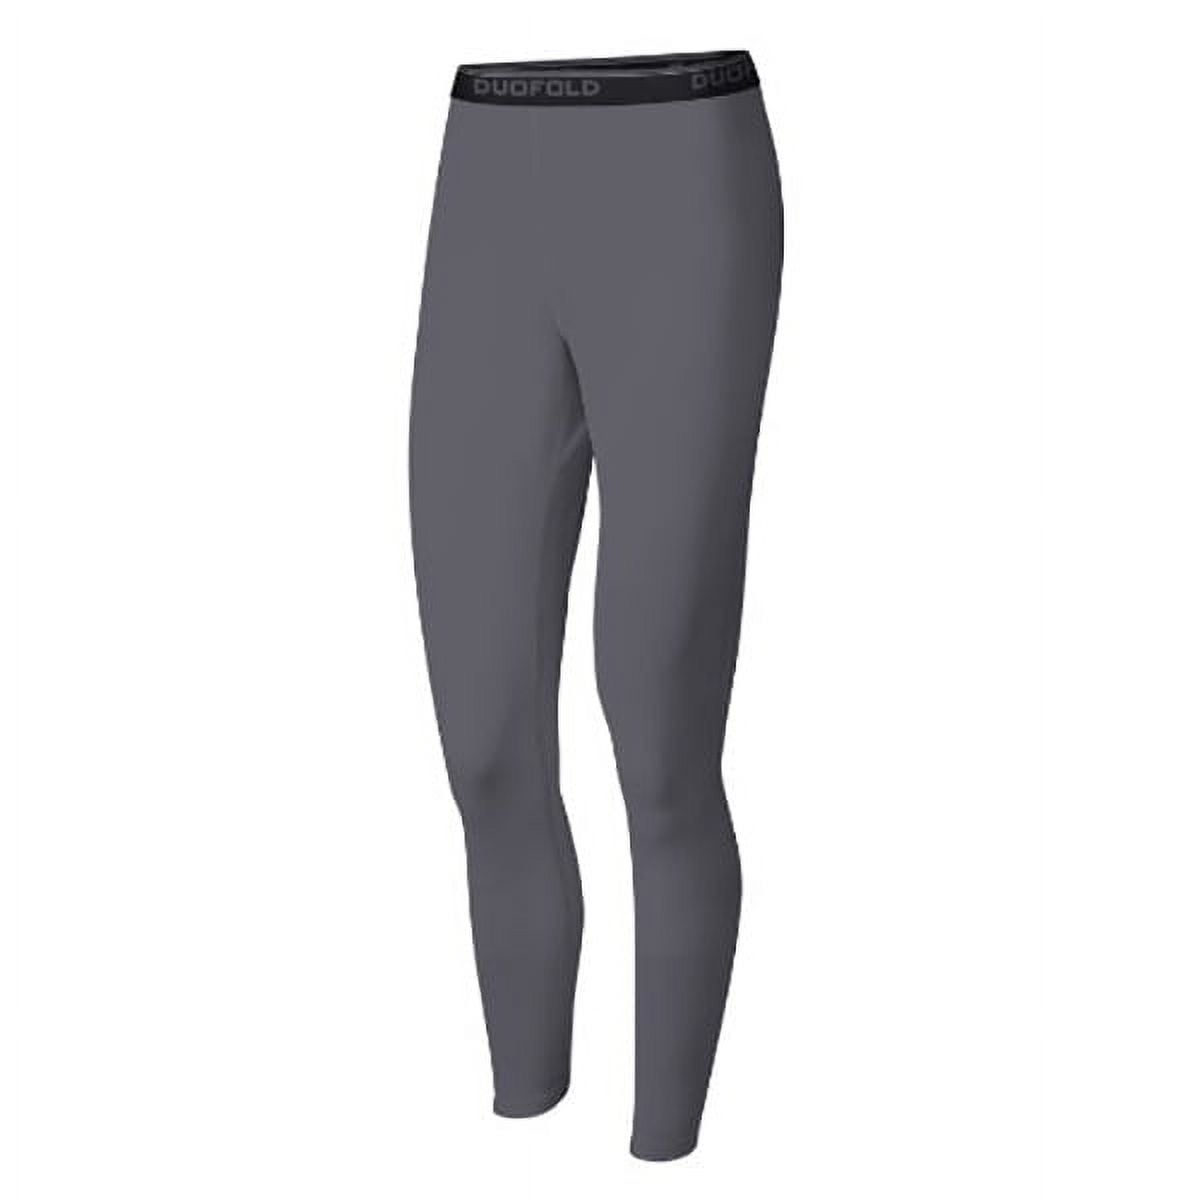 Duofold Womens Varitherm Performance Base Layer Thermal Leggings S